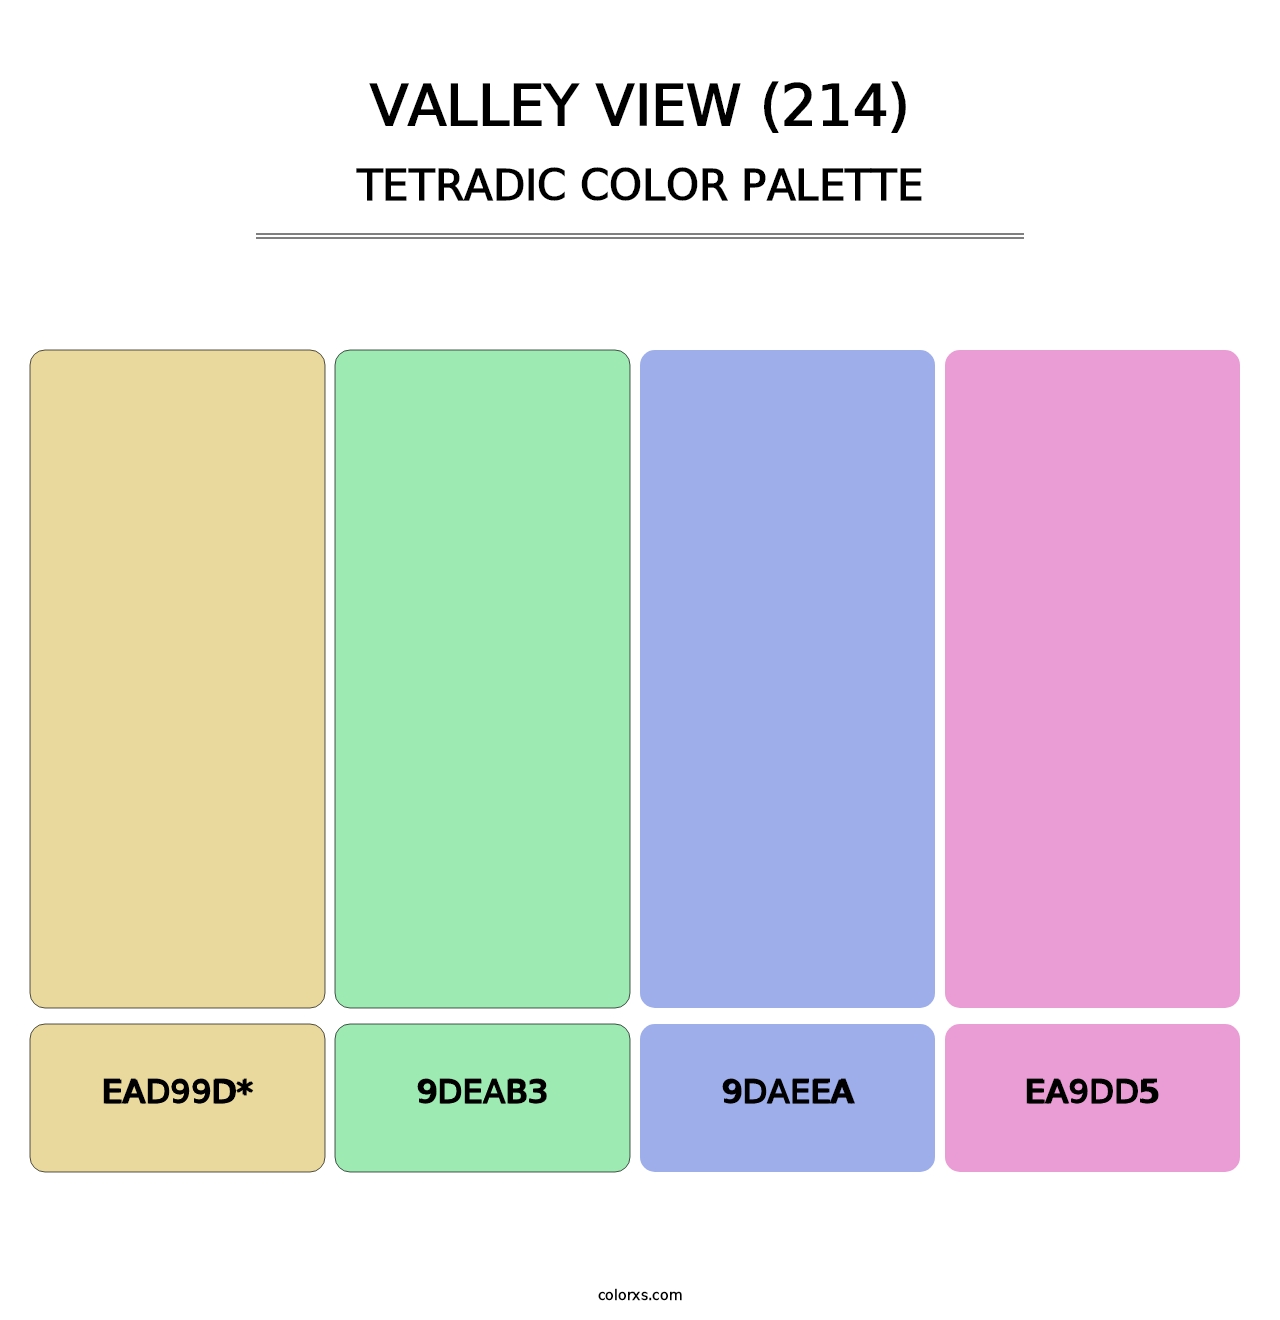 Valley View (214) - Tetradic Color Palette